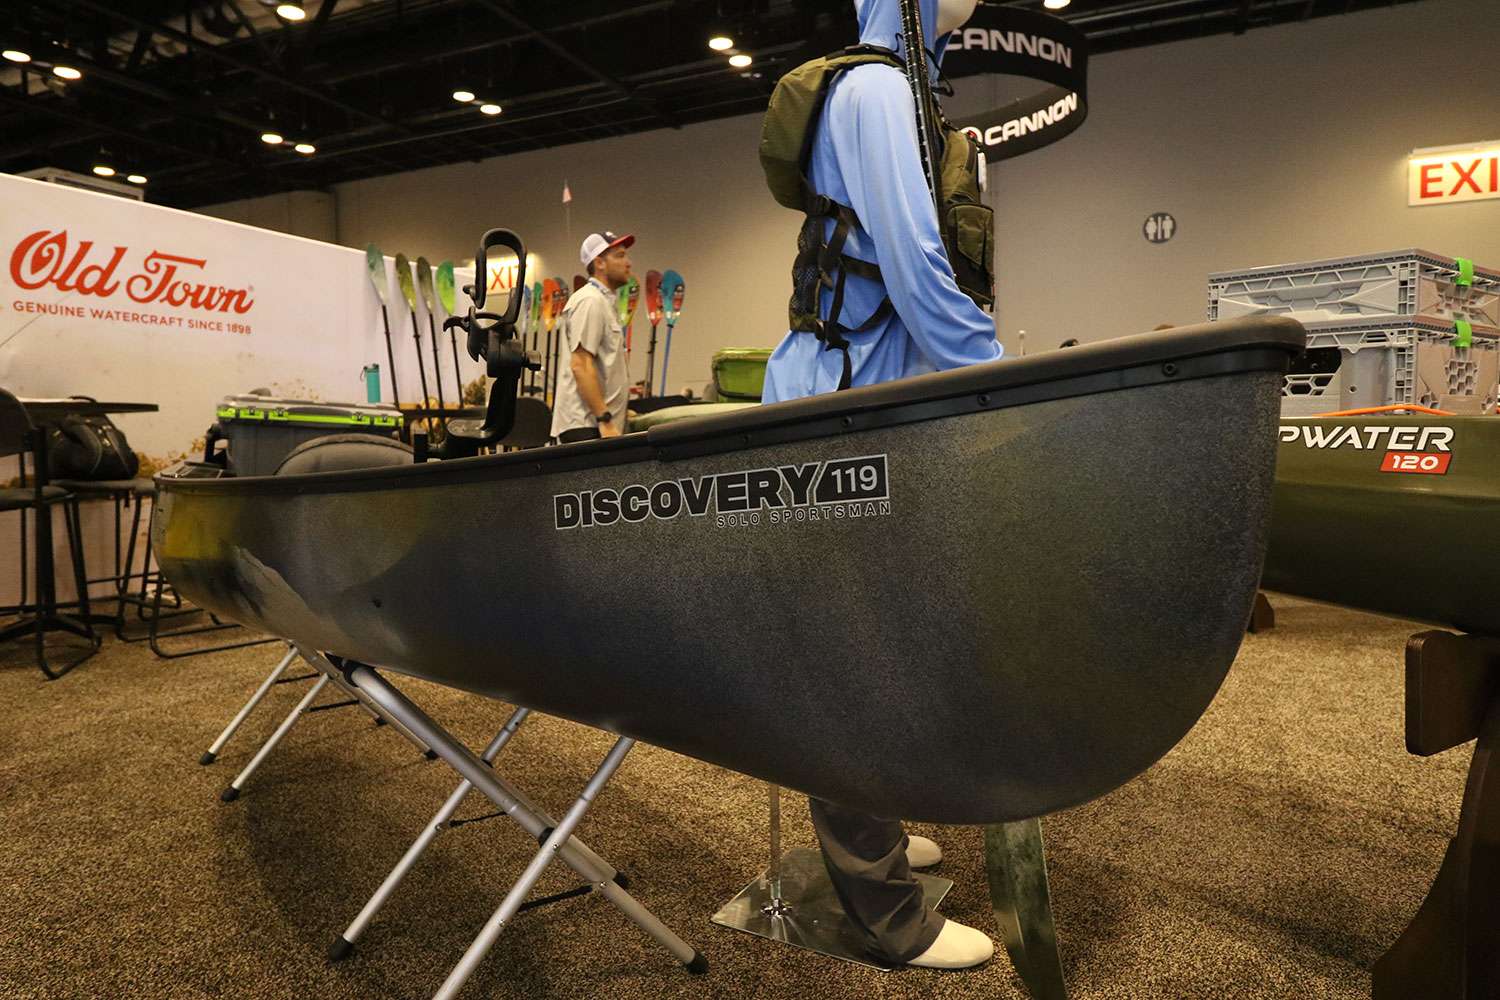 Old Town also introduced a very lightweight, one-man canoe called the Discovery 119. It only weighs 56 pounds and features lots of cool angler-friendly components. 